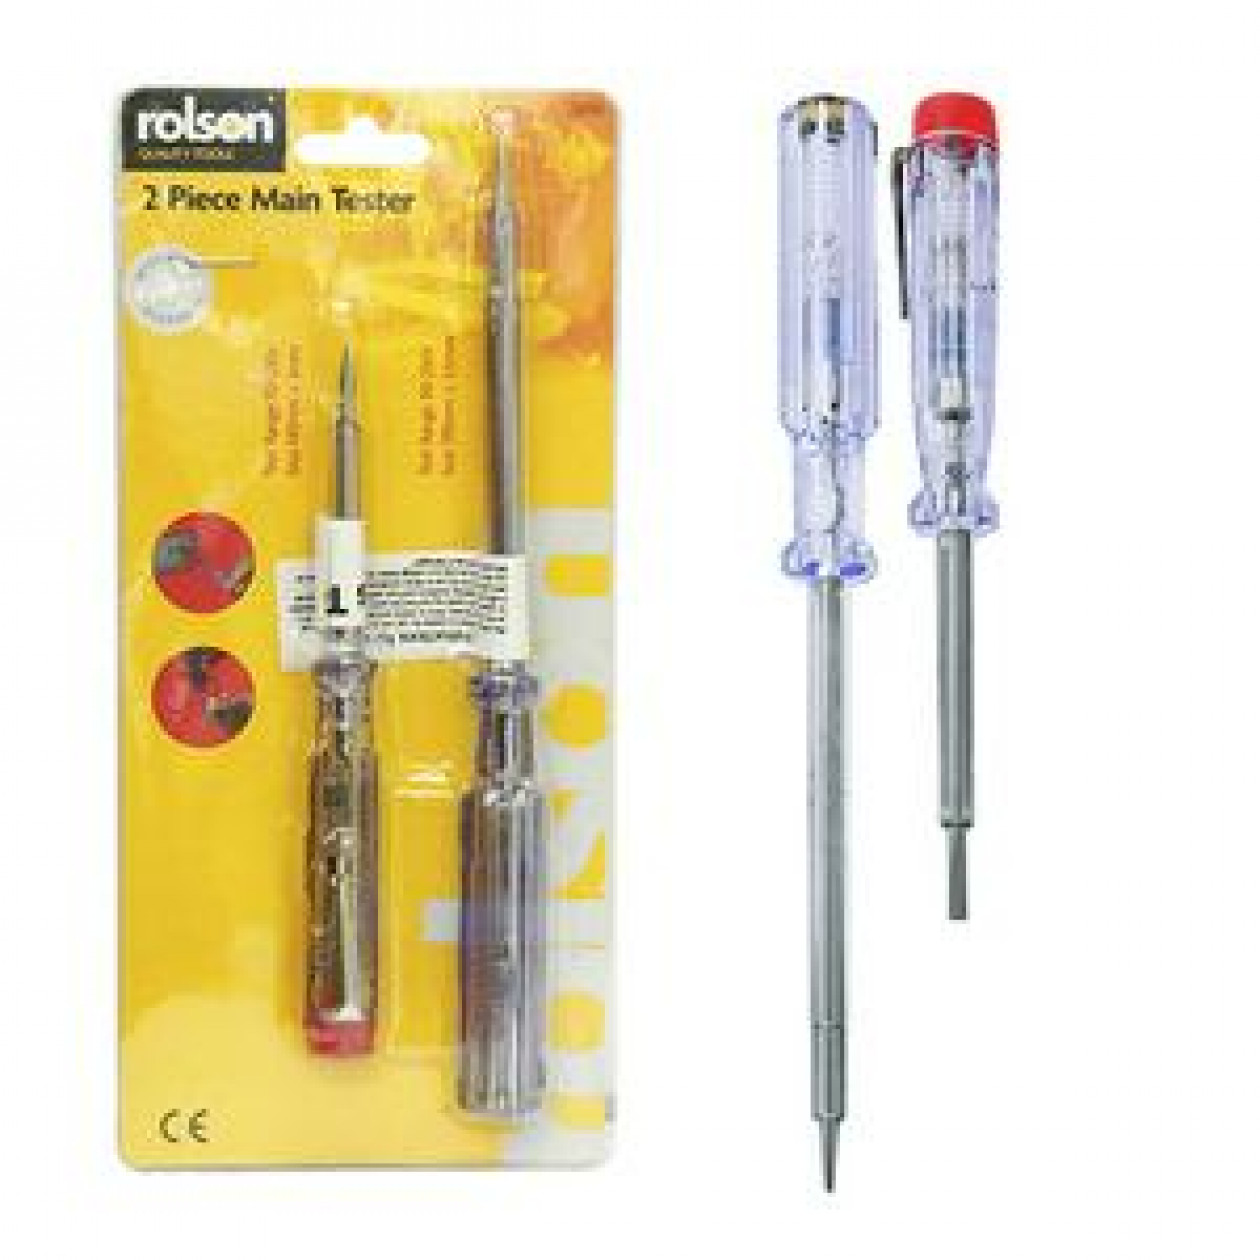 Rolson Mains Voltage Tester 2pc